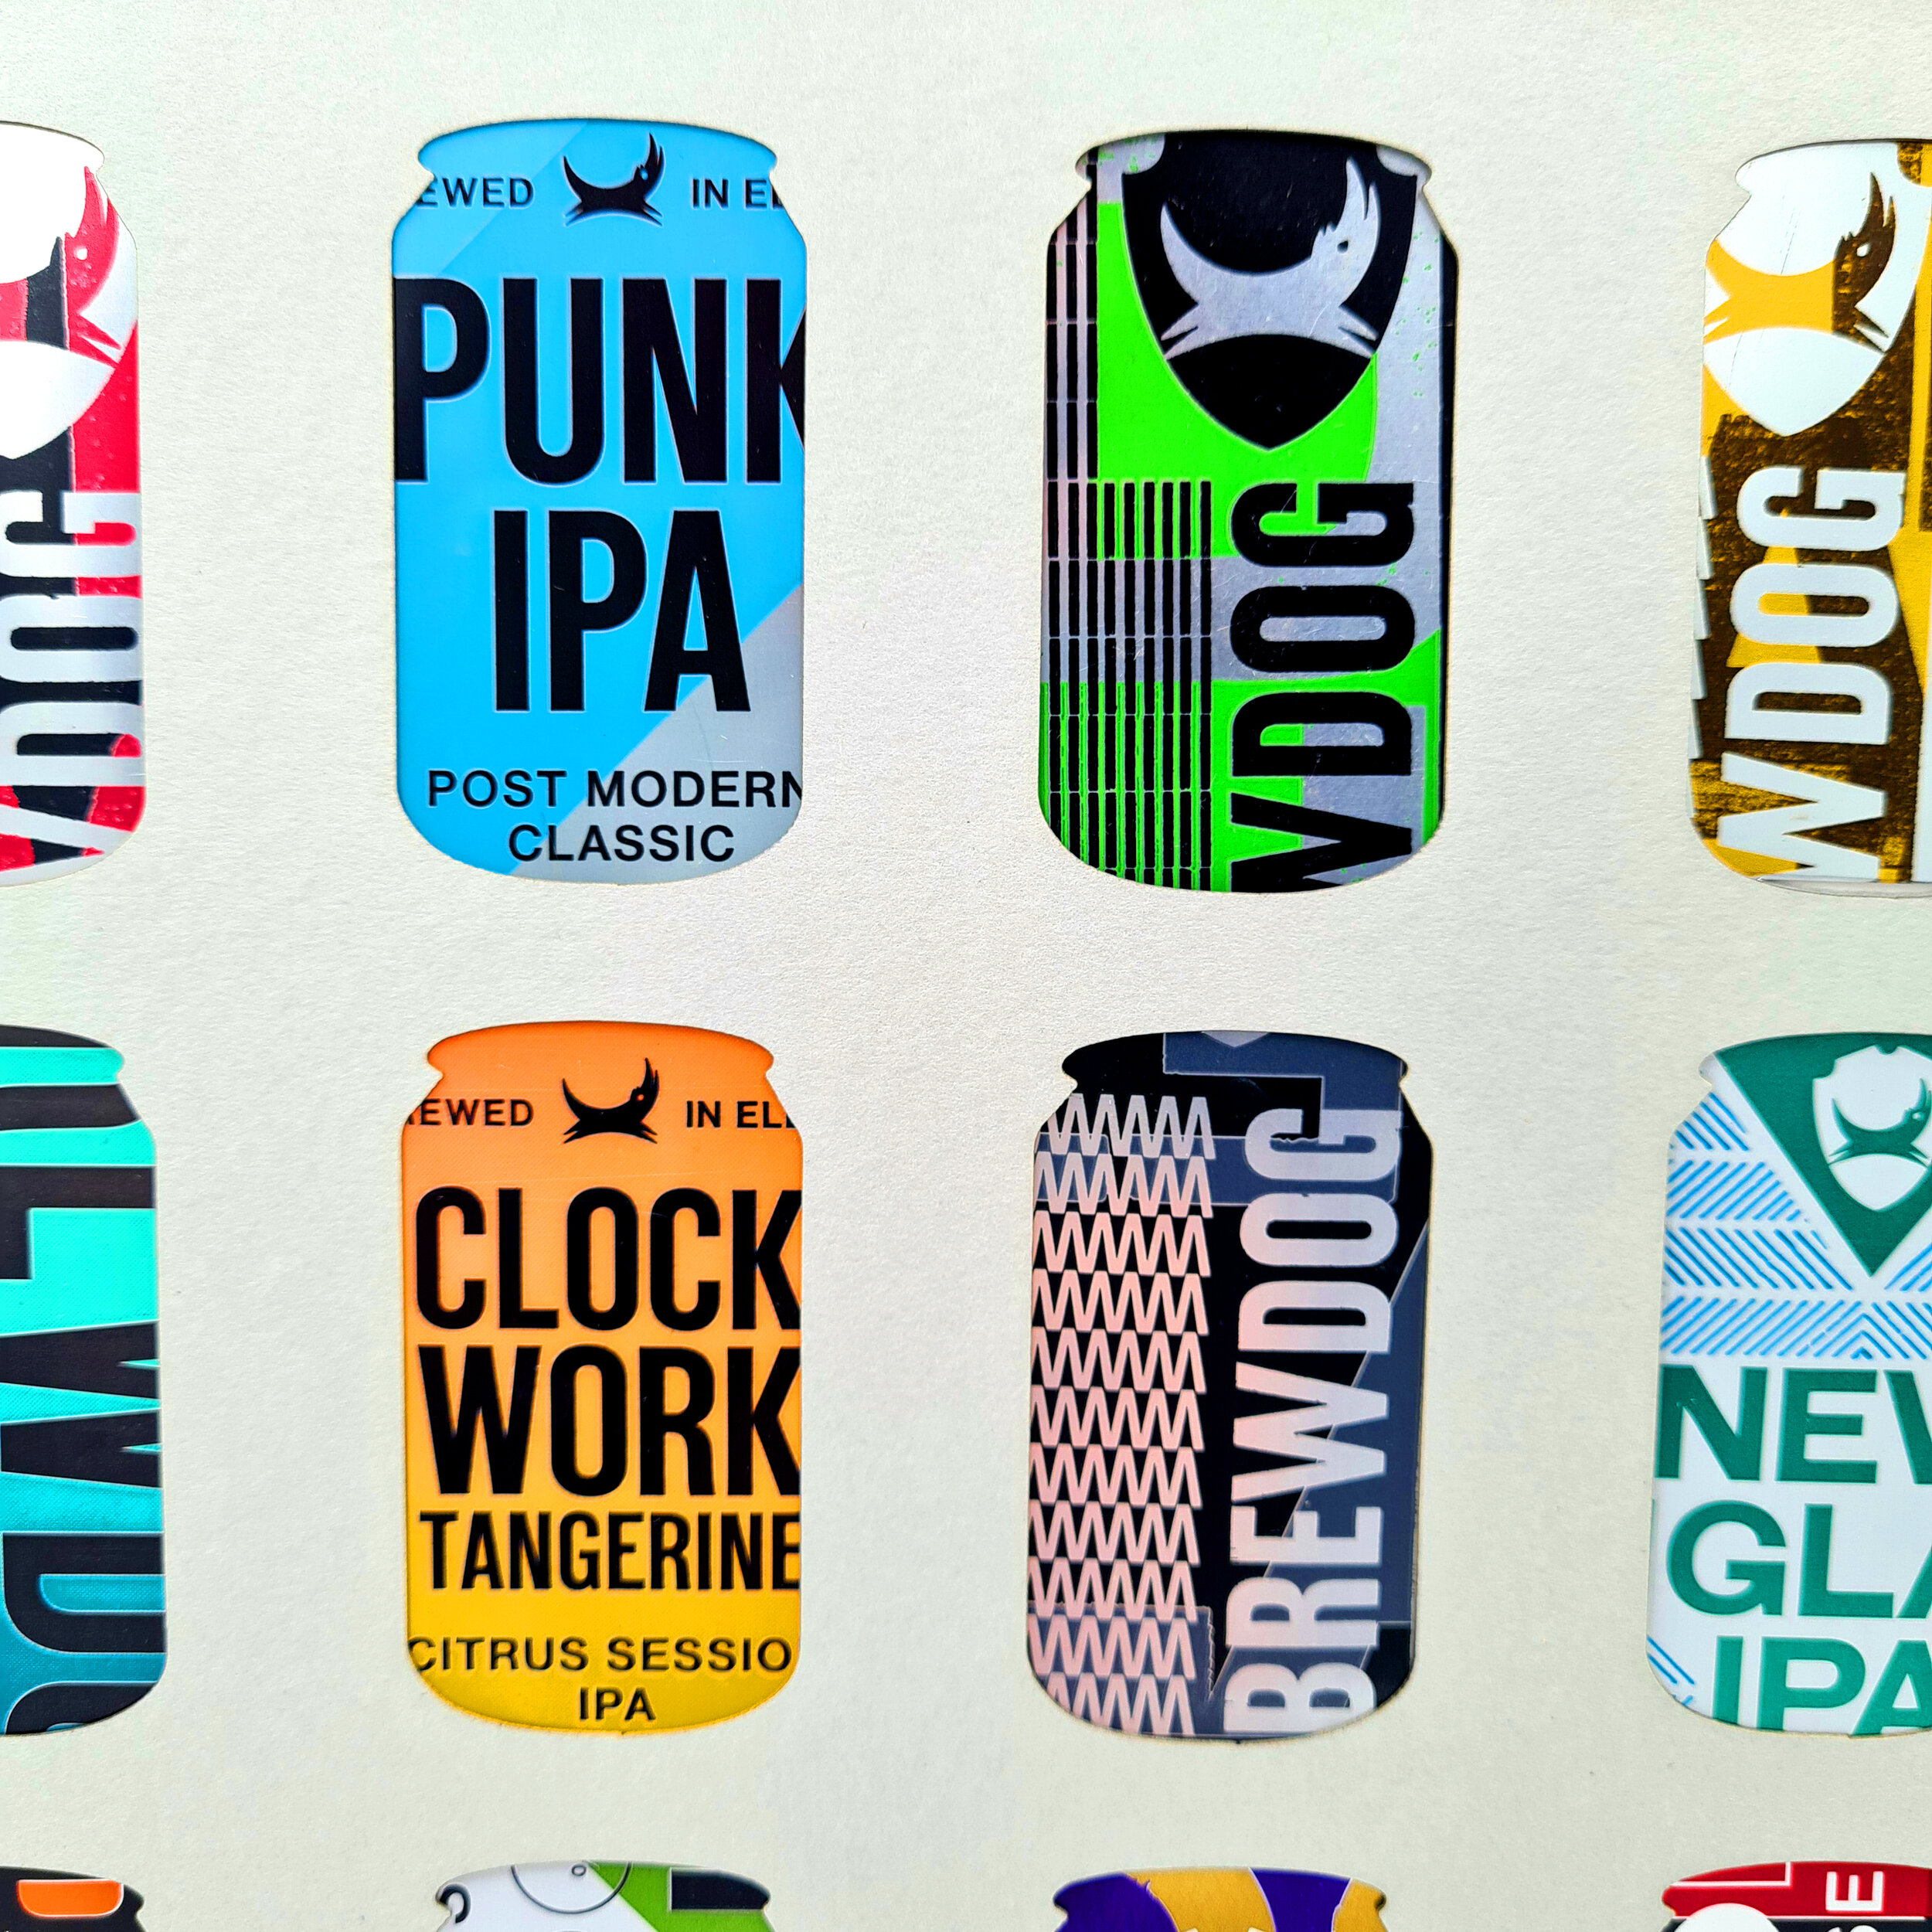 Brewdog craft beer can picture handmade by Sarah Turner